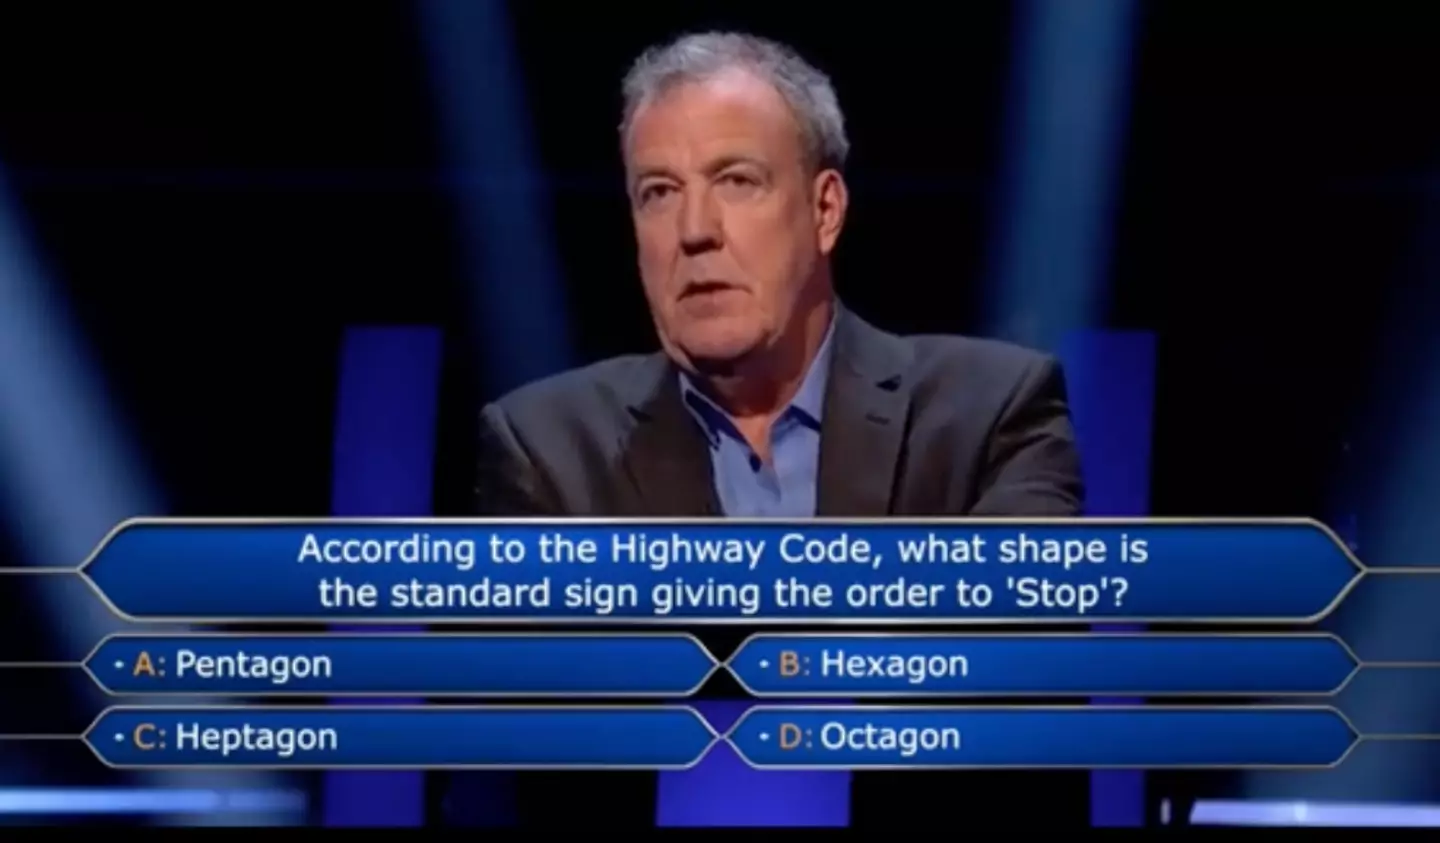 Clarkson was stumped by the question.